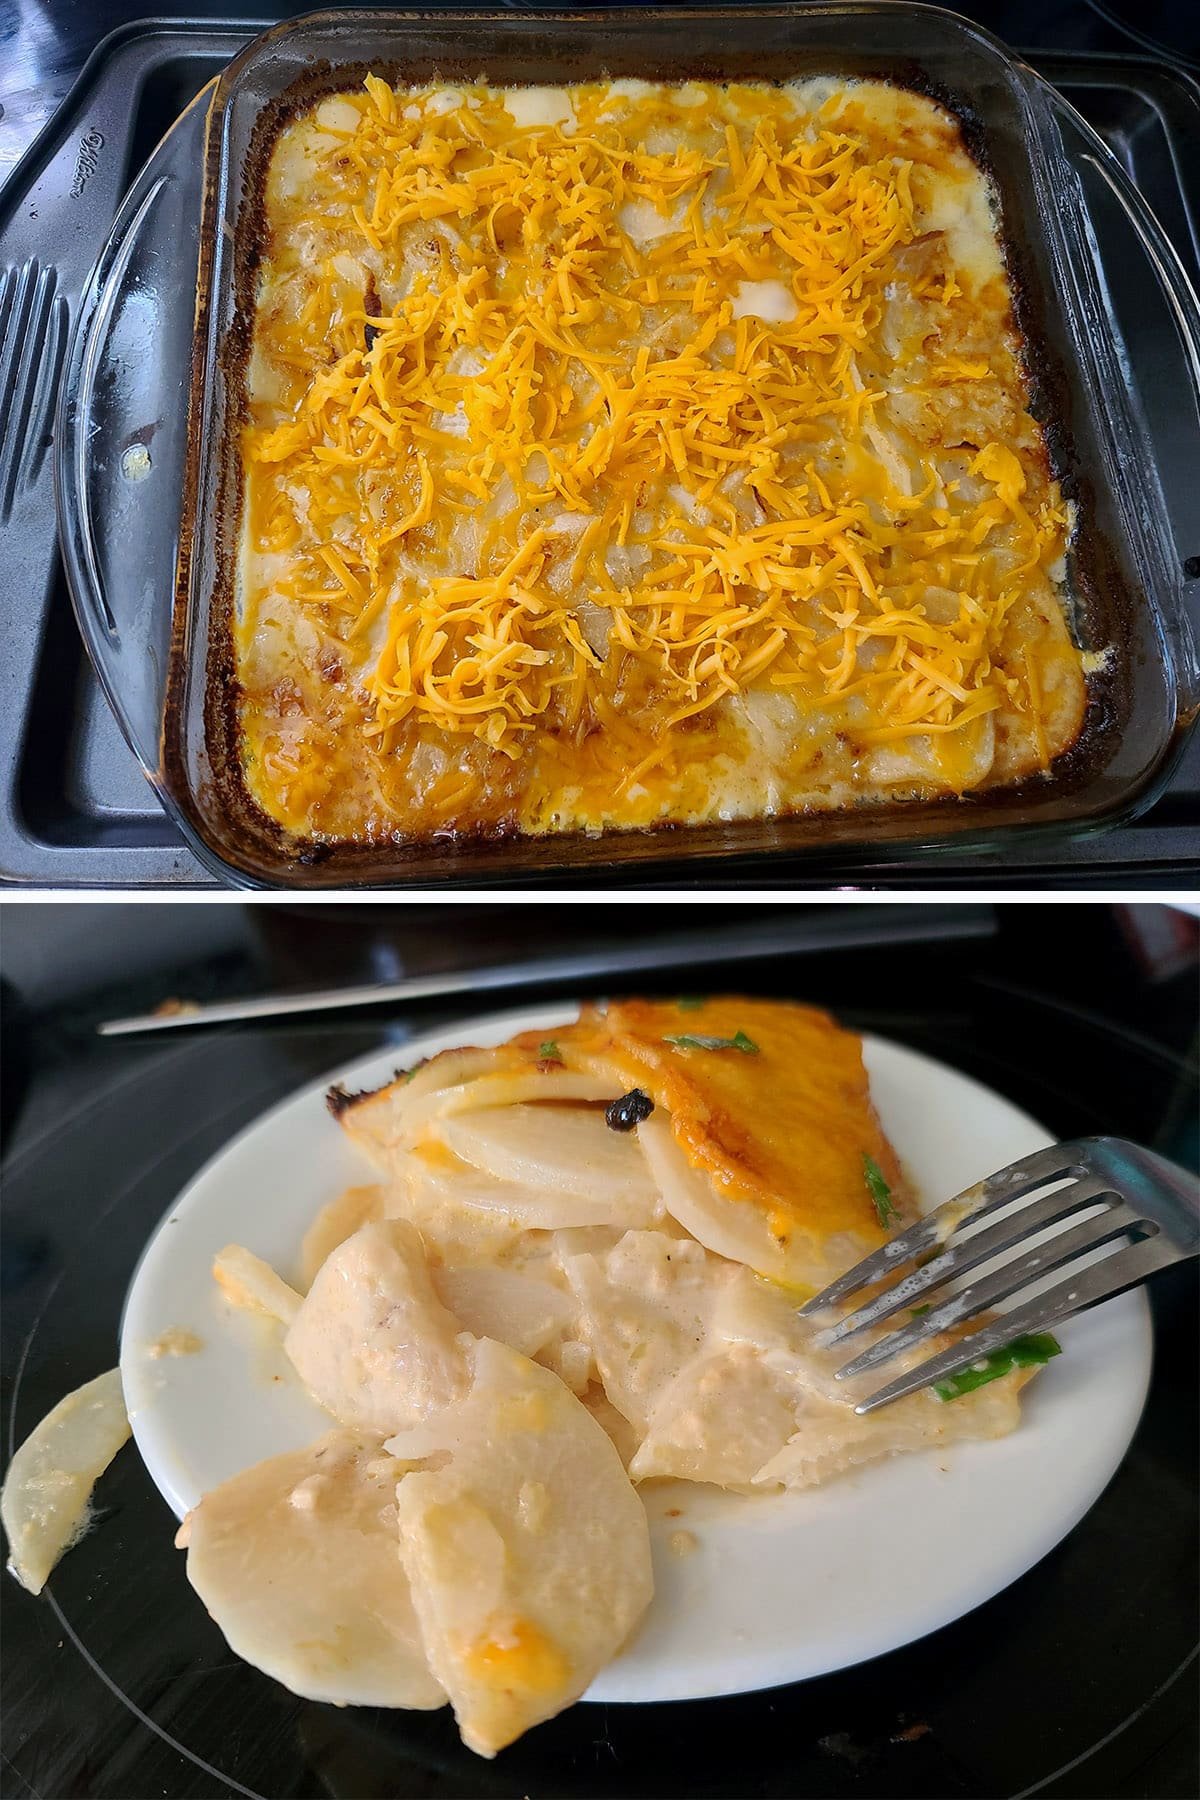 The pan with cheese added, and a serving on a plate.